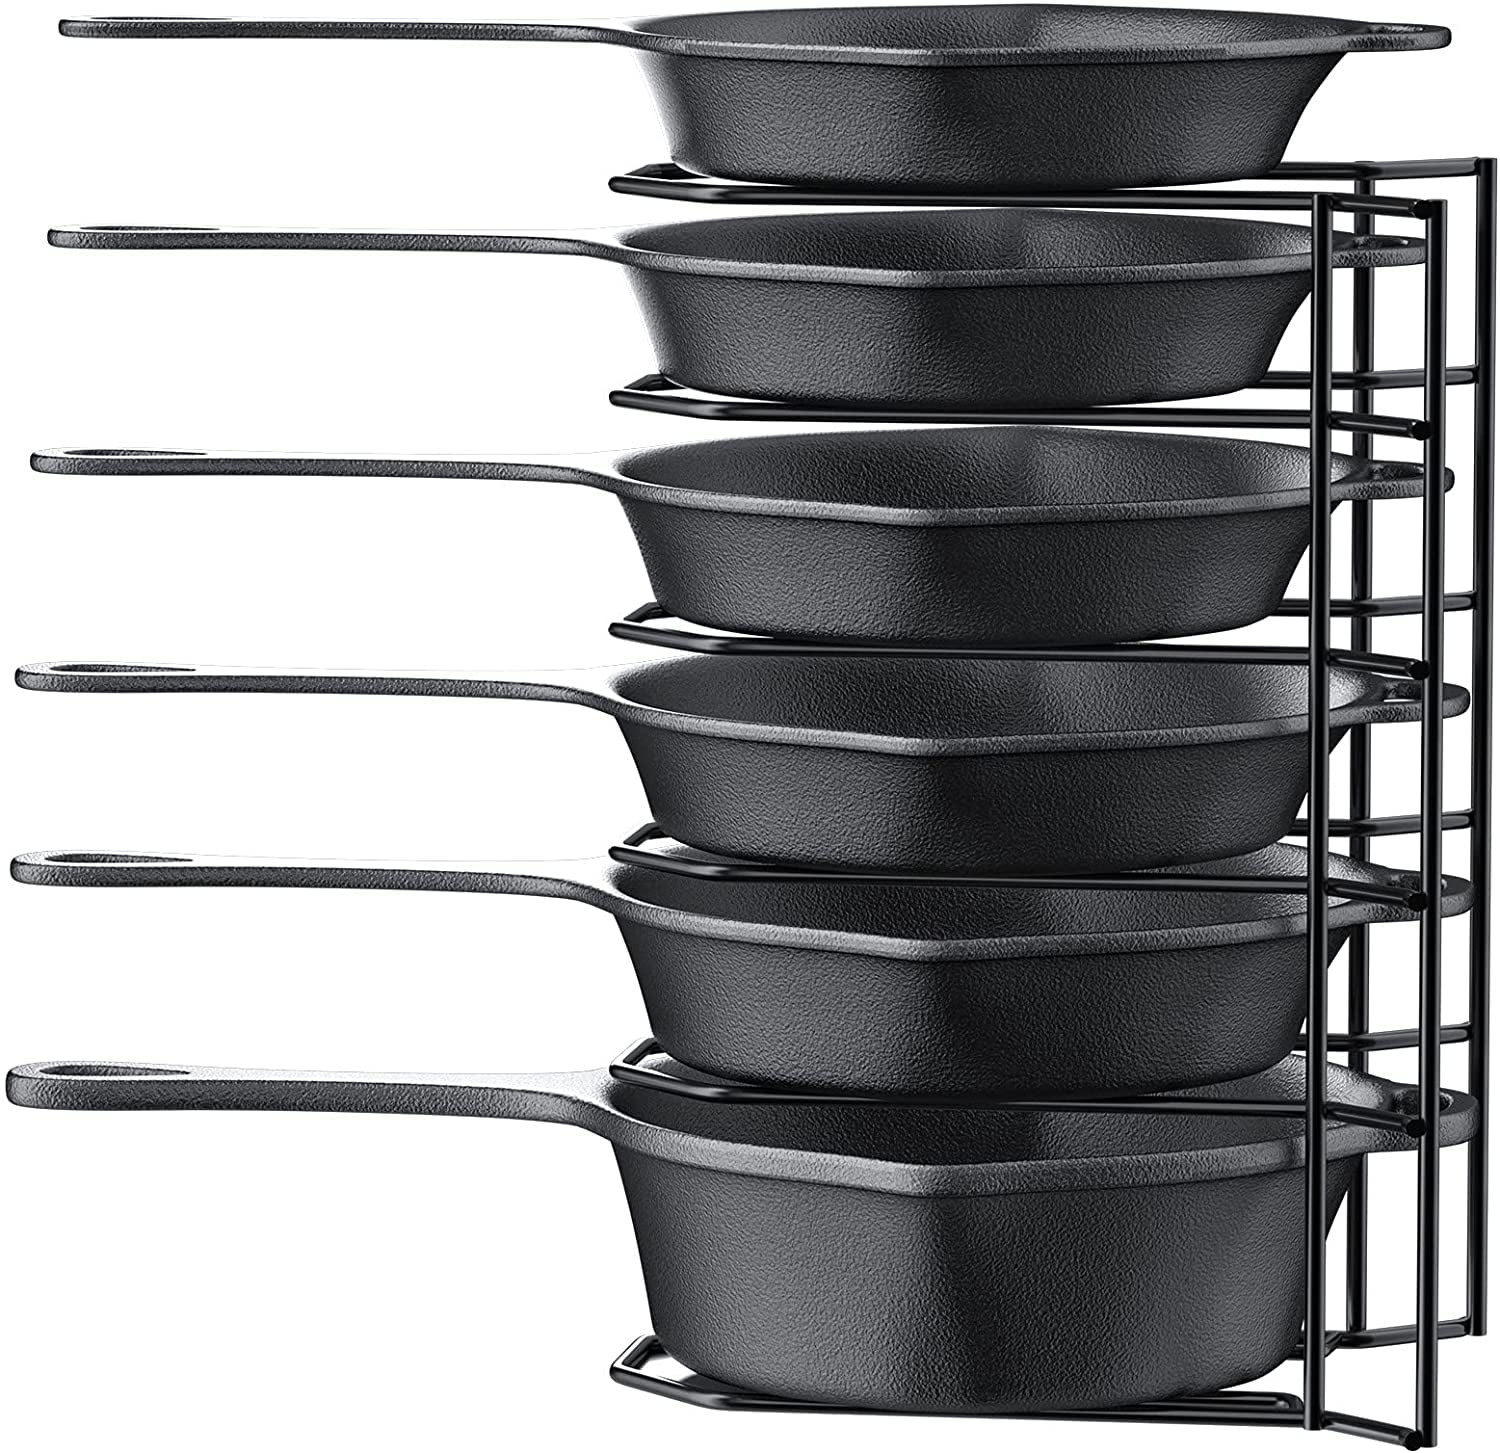 mudeela Pan Organizer Rack for Cabinet, Pot Rack with 3 DIY Methods,  Adjustable Pots and Pans Organizer under Cabinet with 8 Tiers, Larg